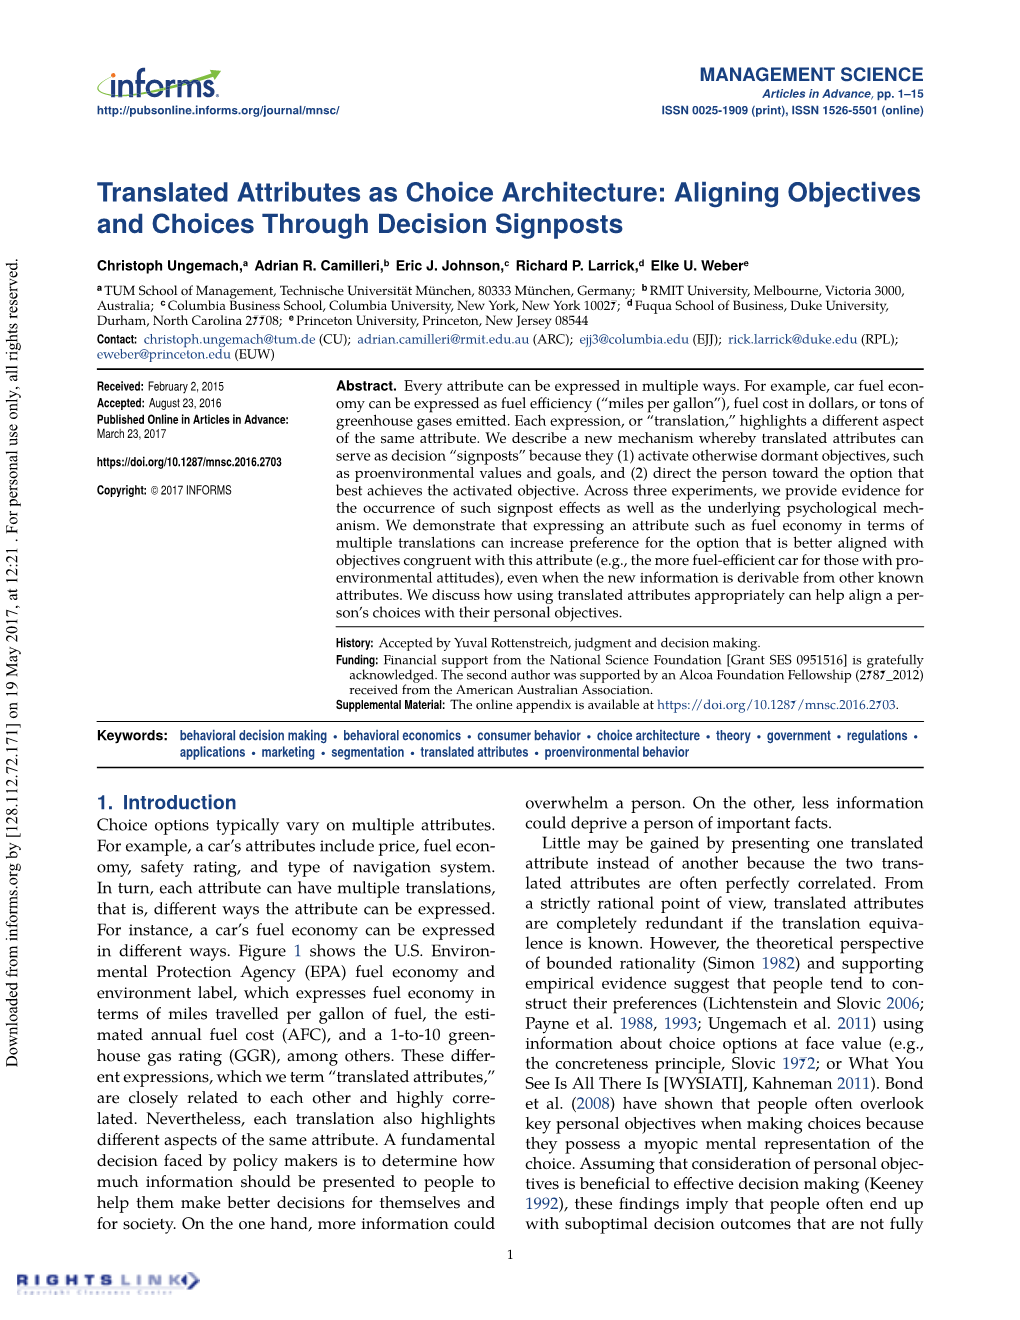 Translated Attributes As Choice Architecture: Aligning Objectives and Choices Through Decision Signposts